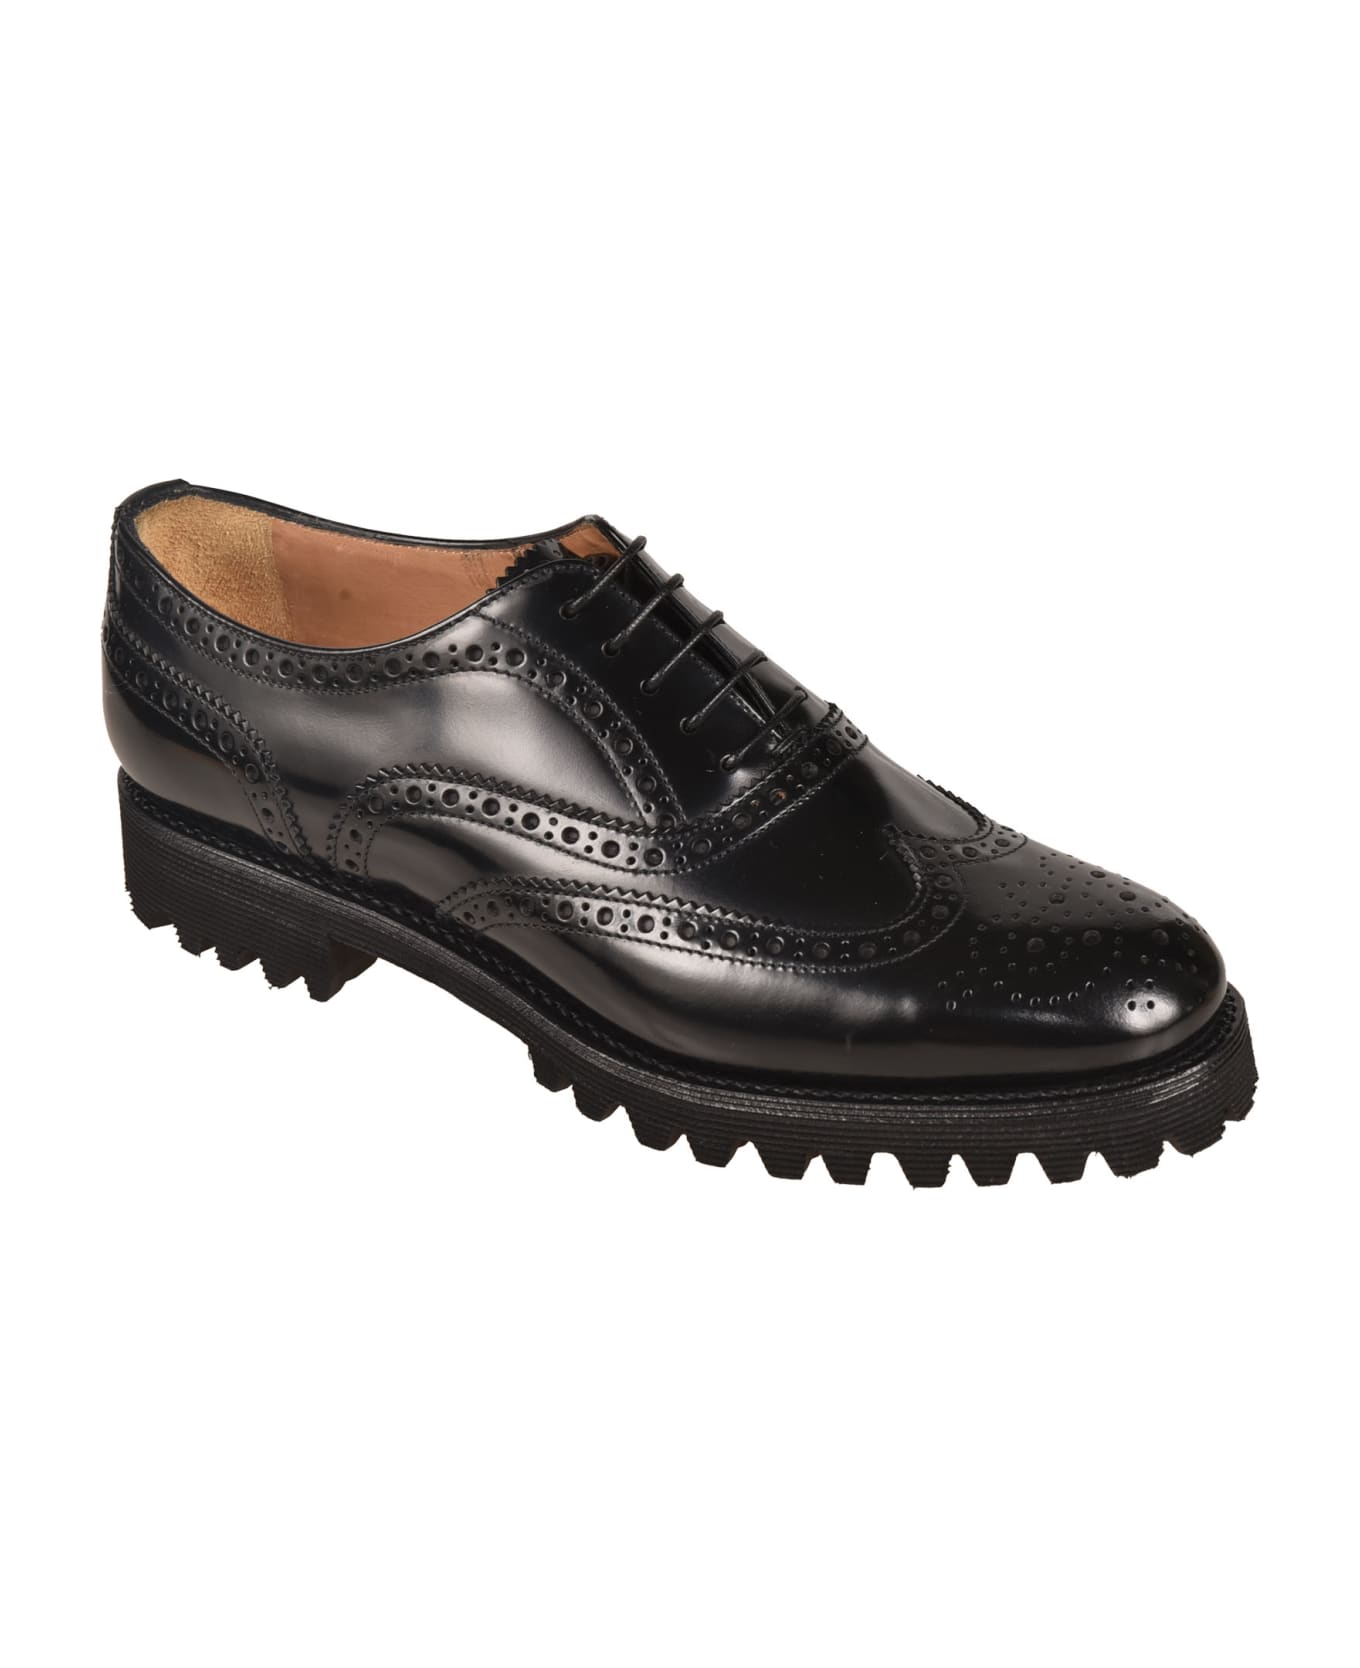 Church's Perforated Oxford Shoes - Black